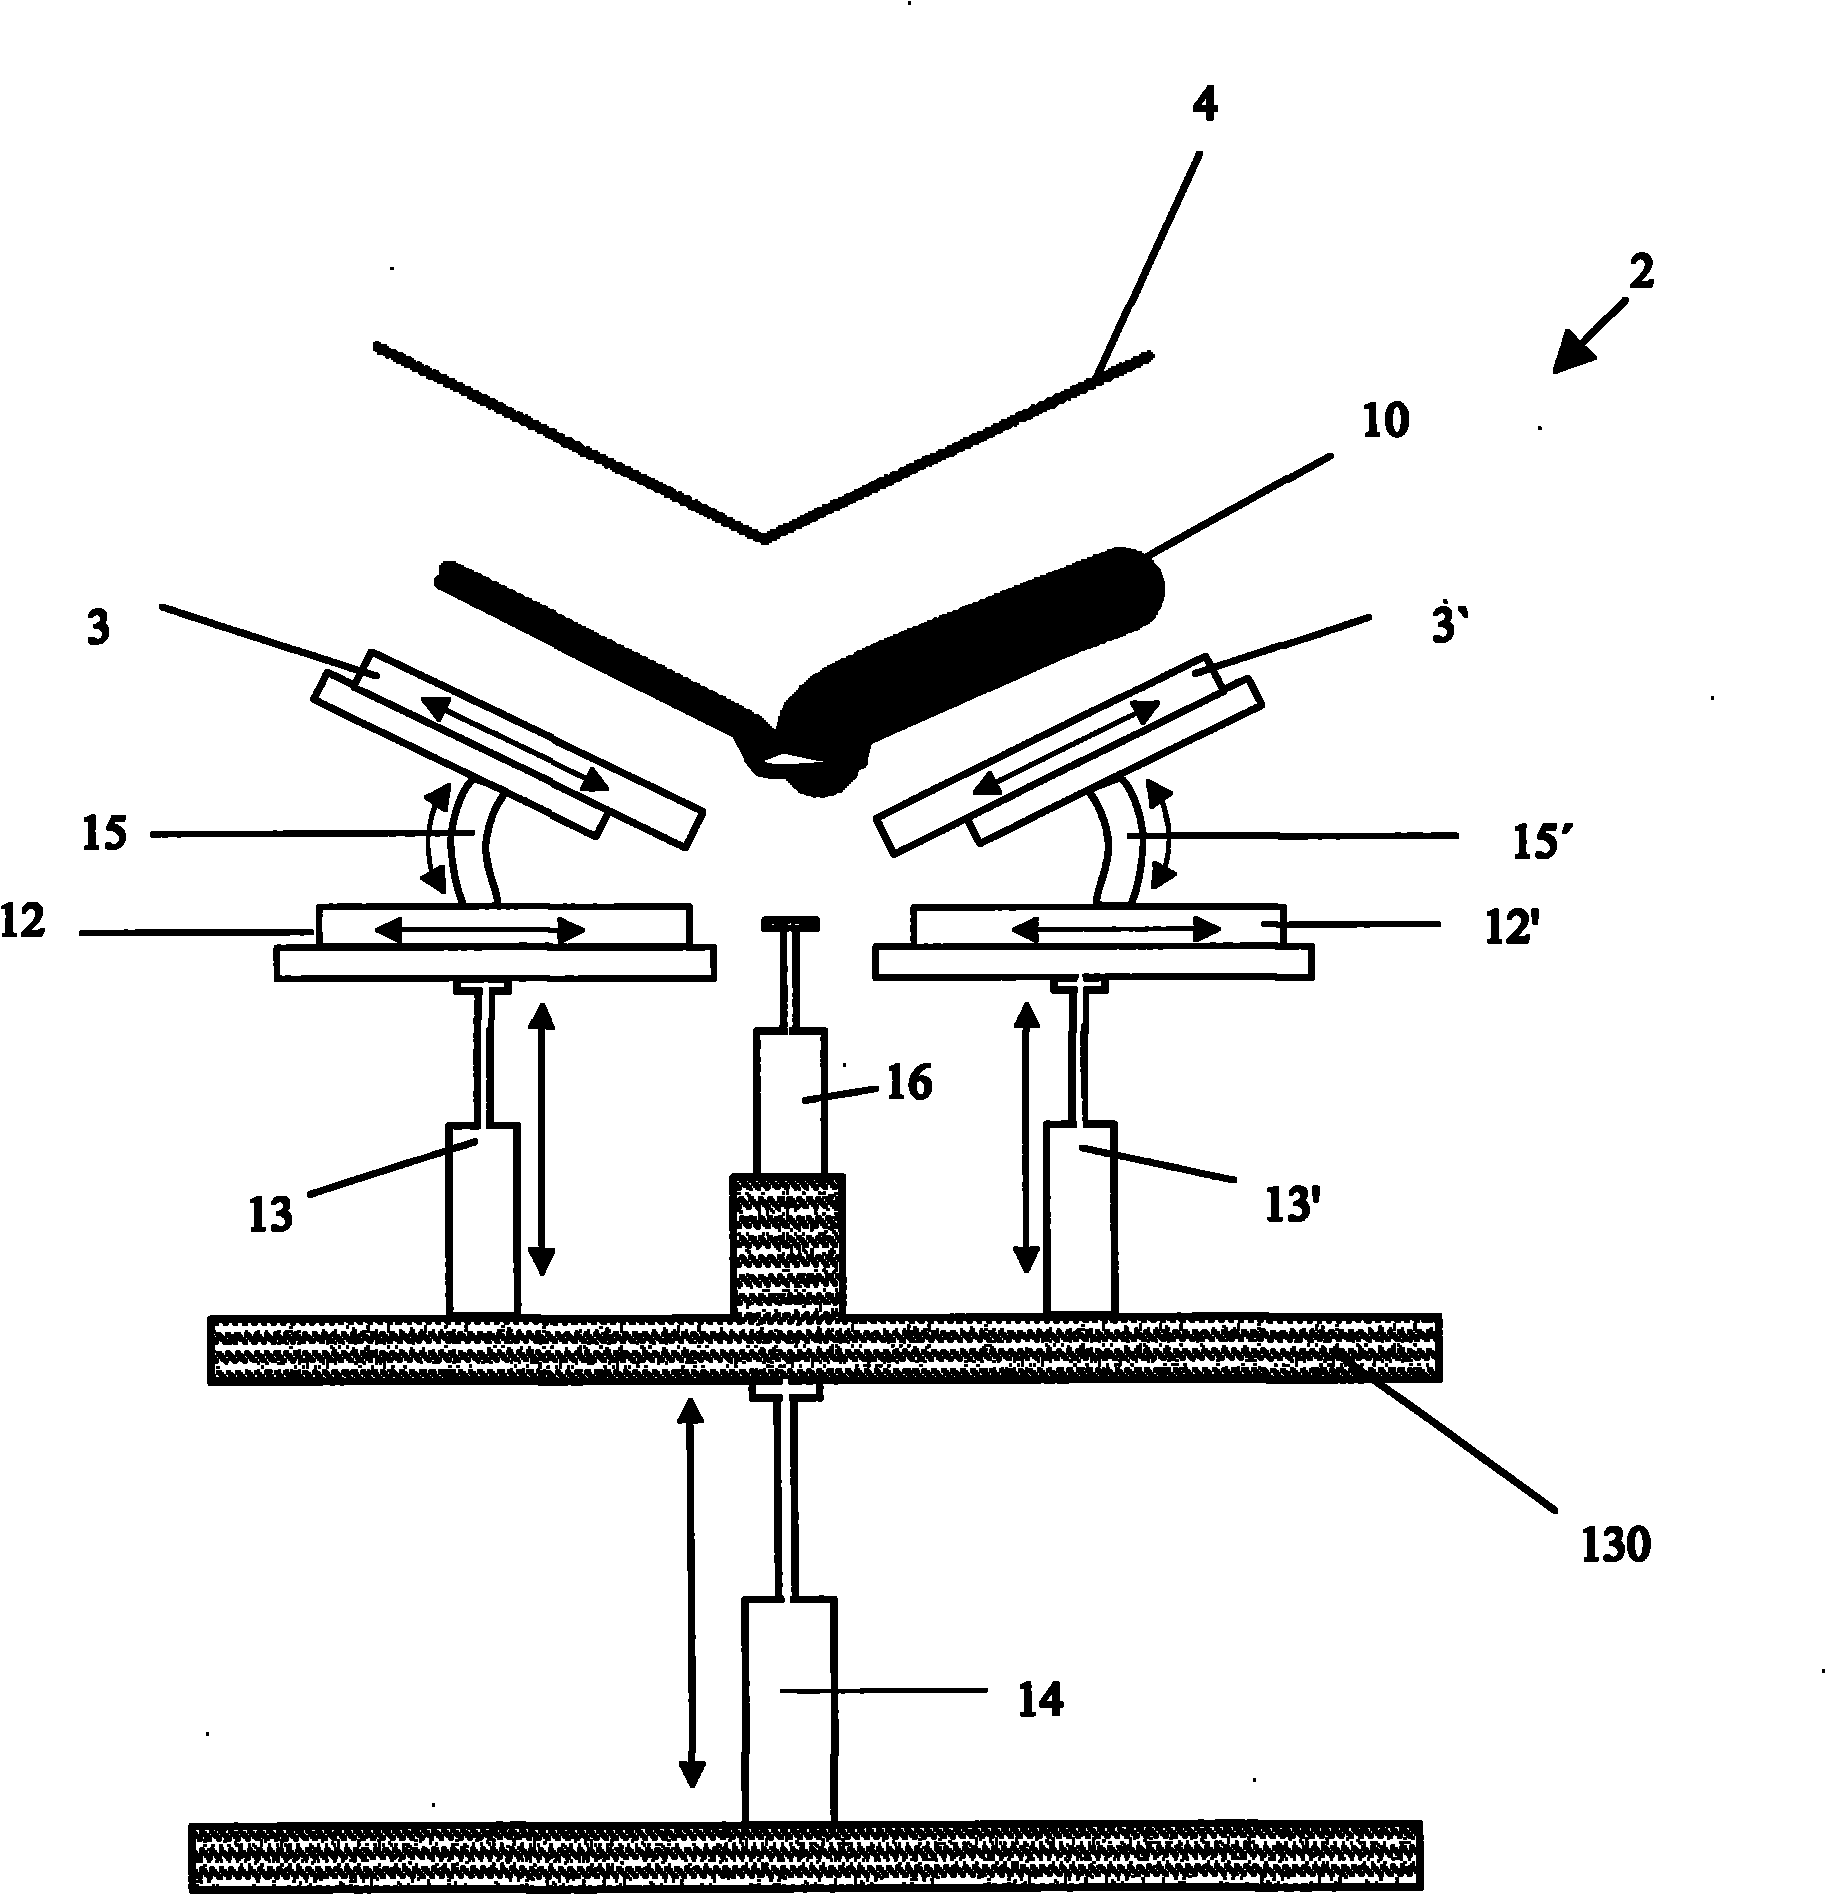 Apparatus for detecting the content of a book